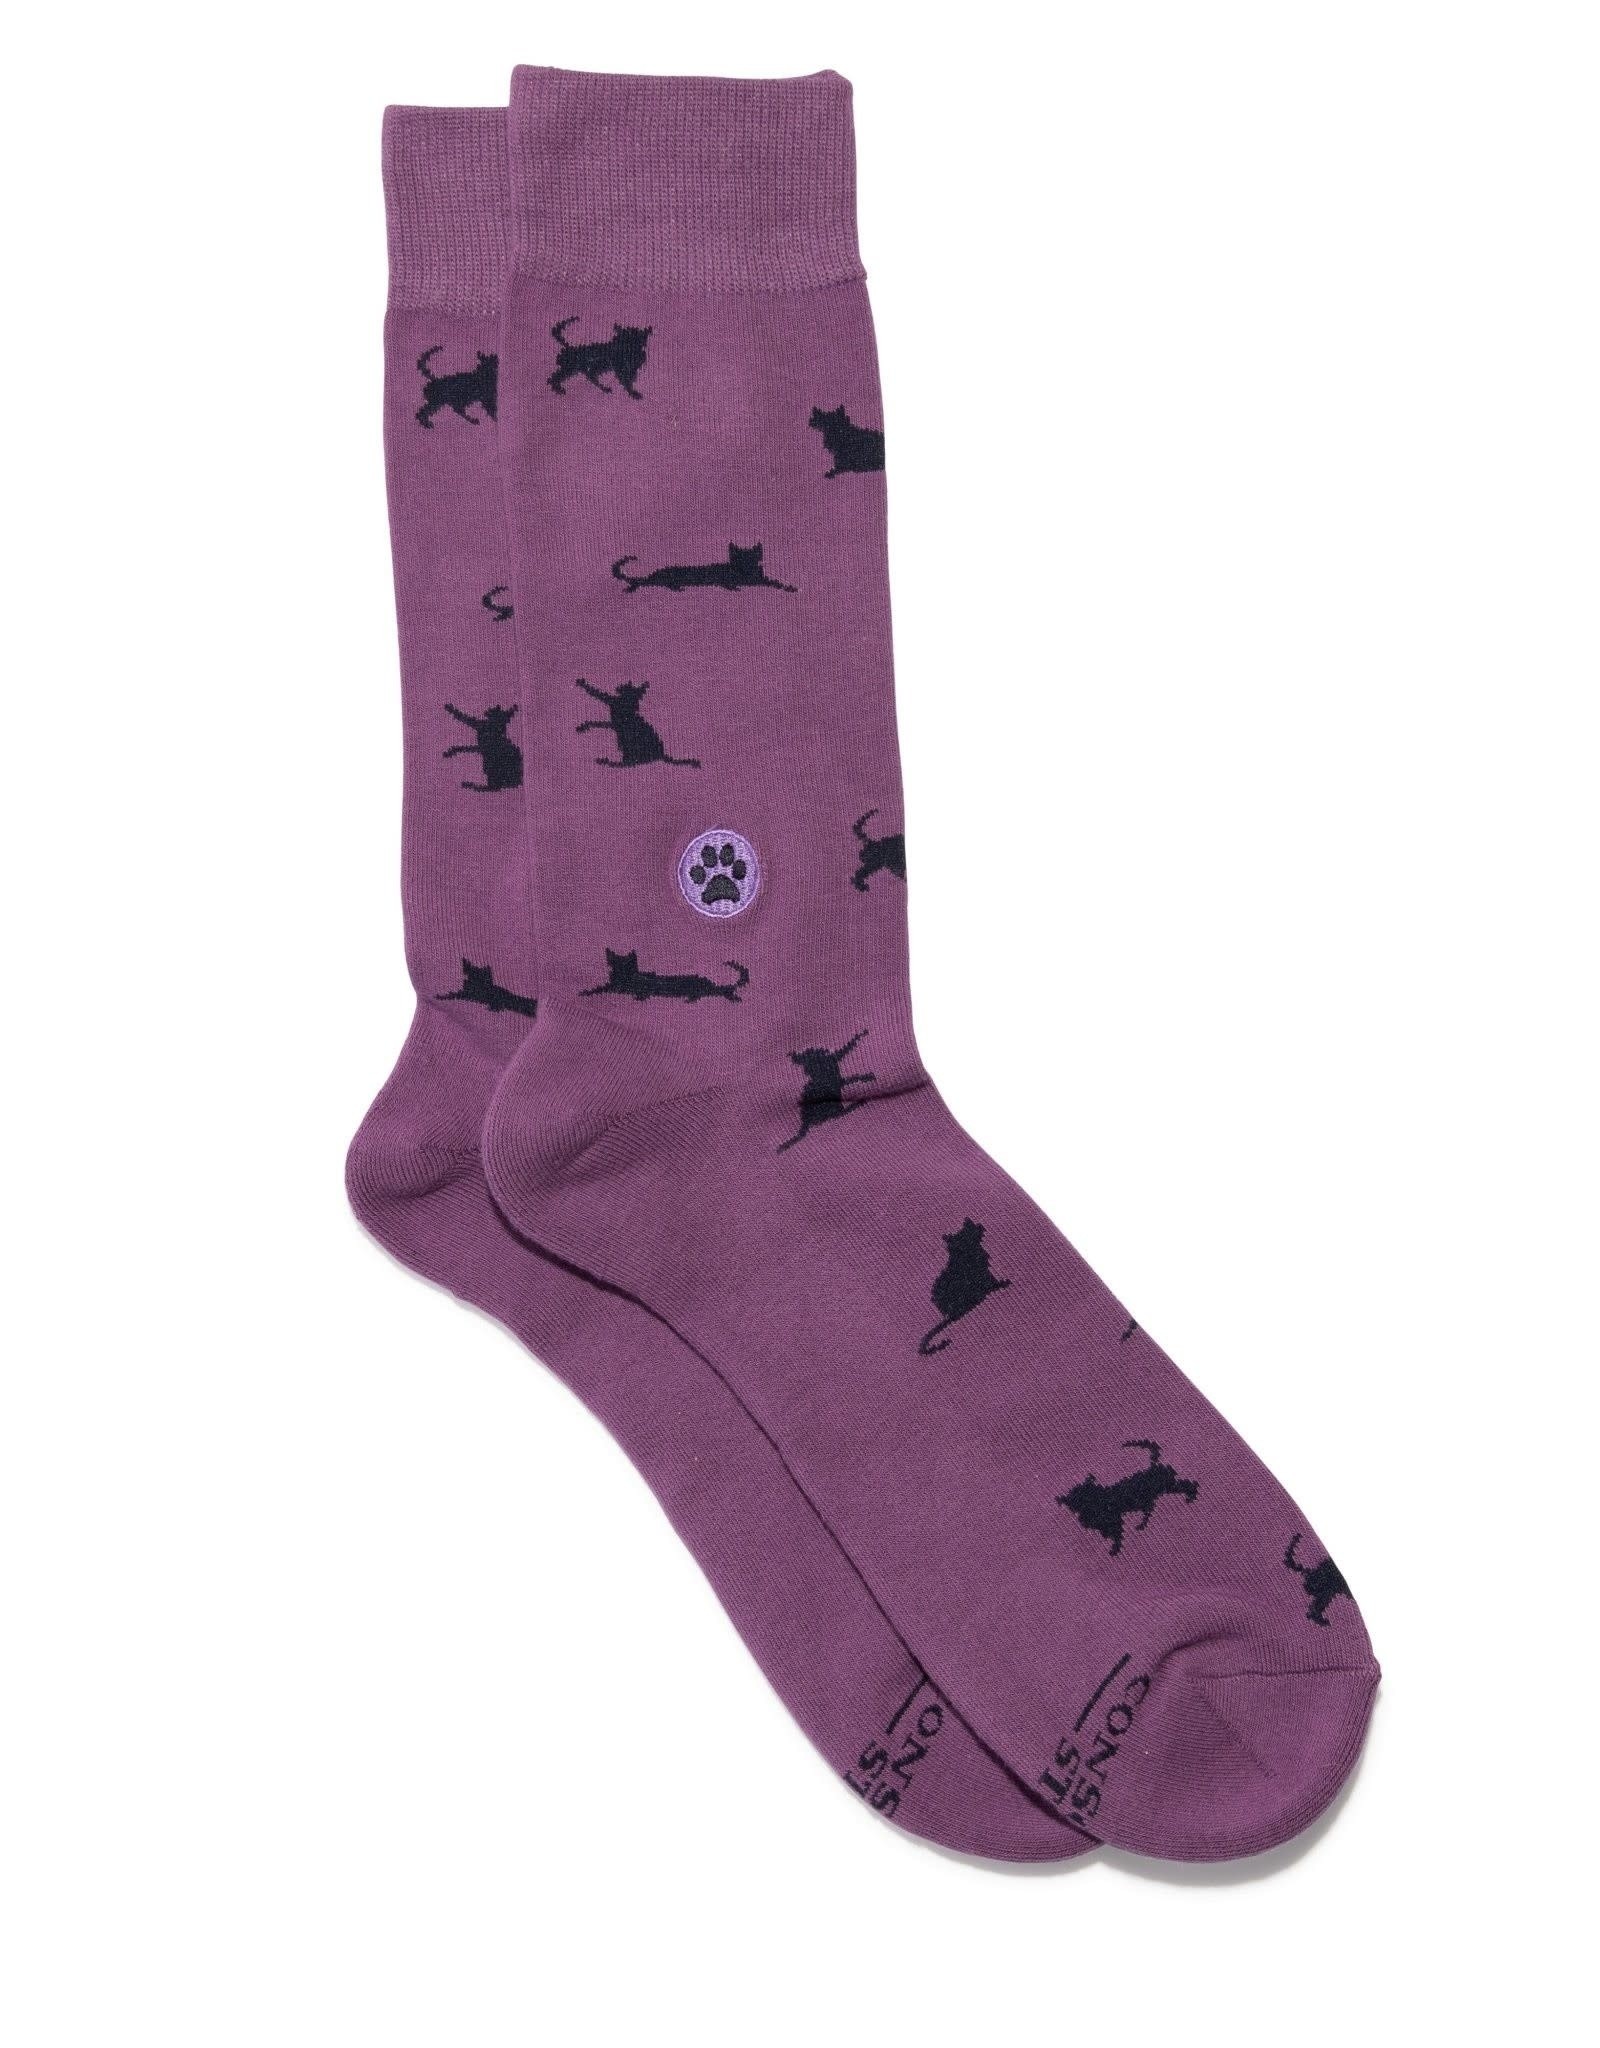 Conscious Step Socks that Save Cats (Purple)